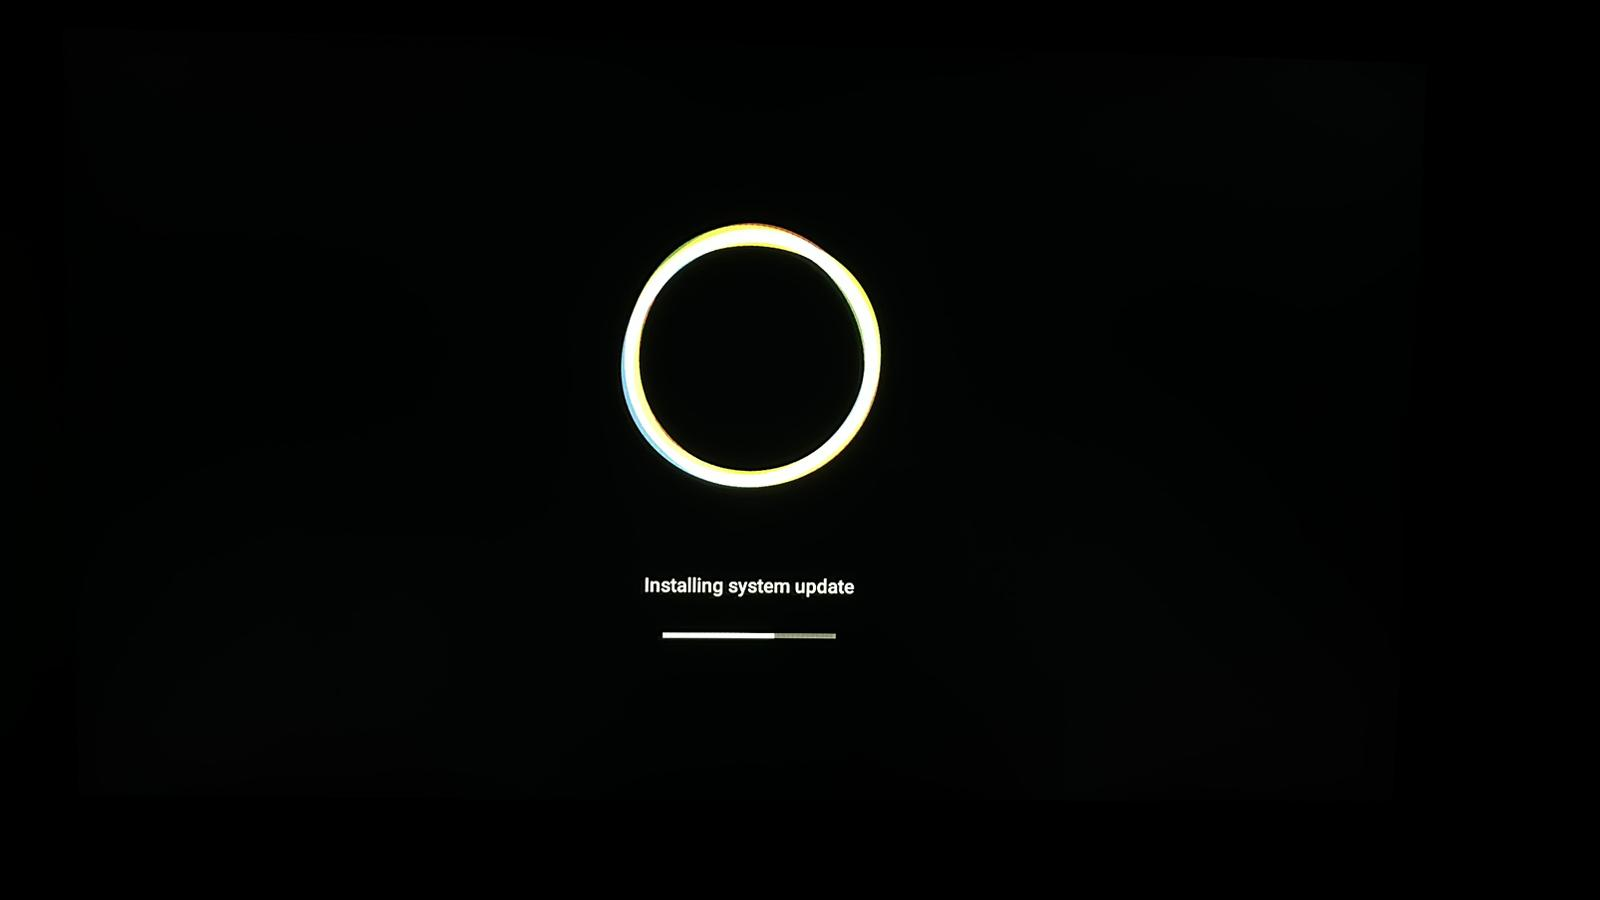 A black screen with a white circle

Description automatically generated